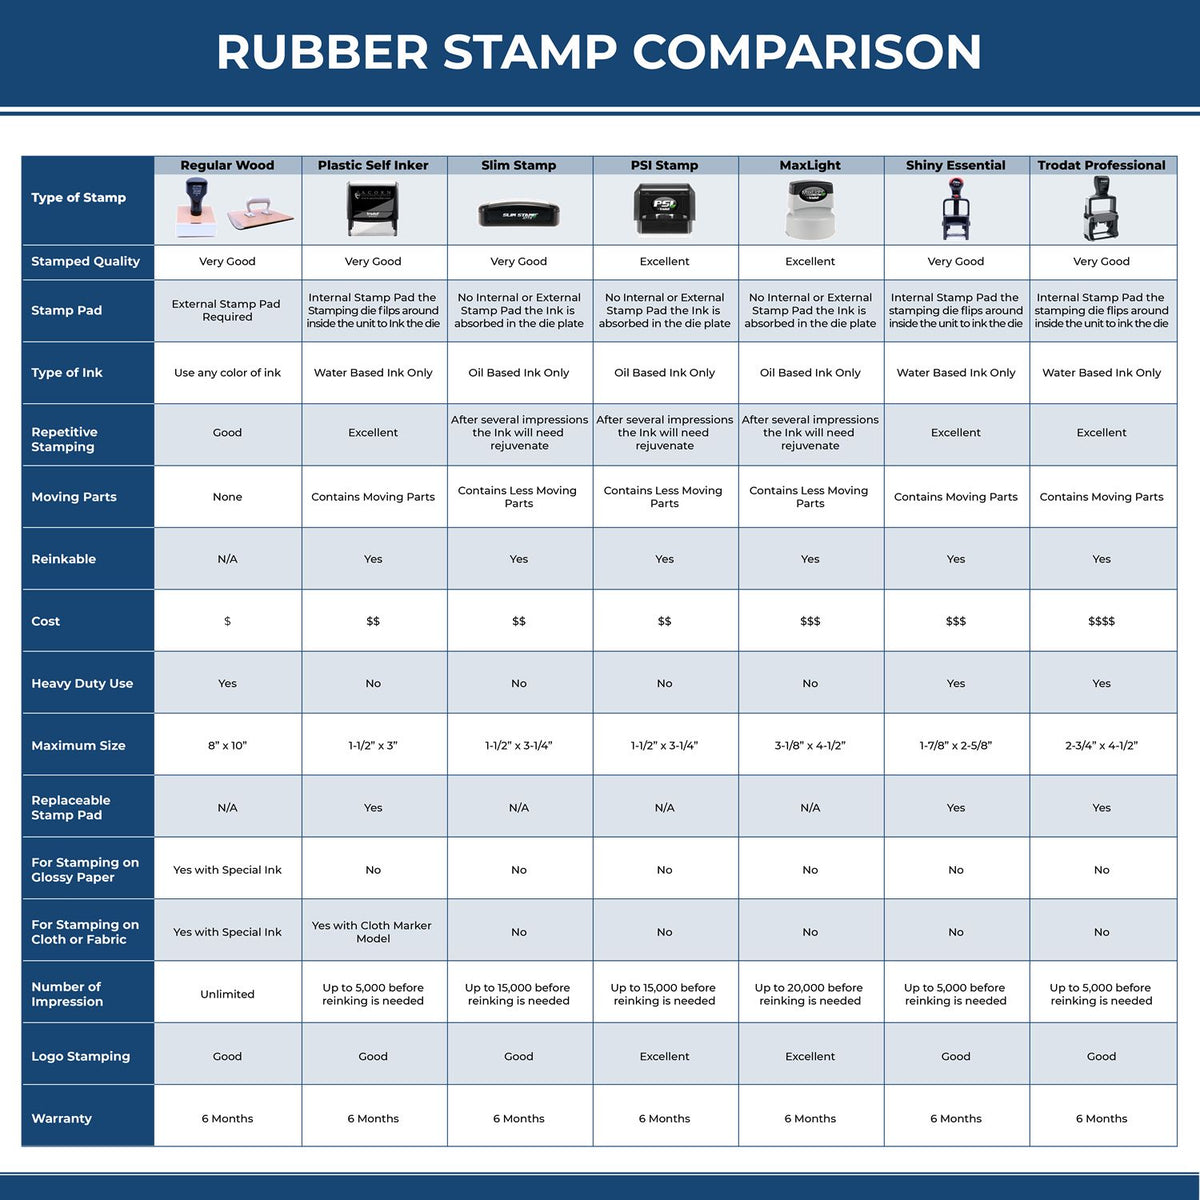 A comparison chart for the different types of mount models available for the PSI South Dakota Notary Stamp.